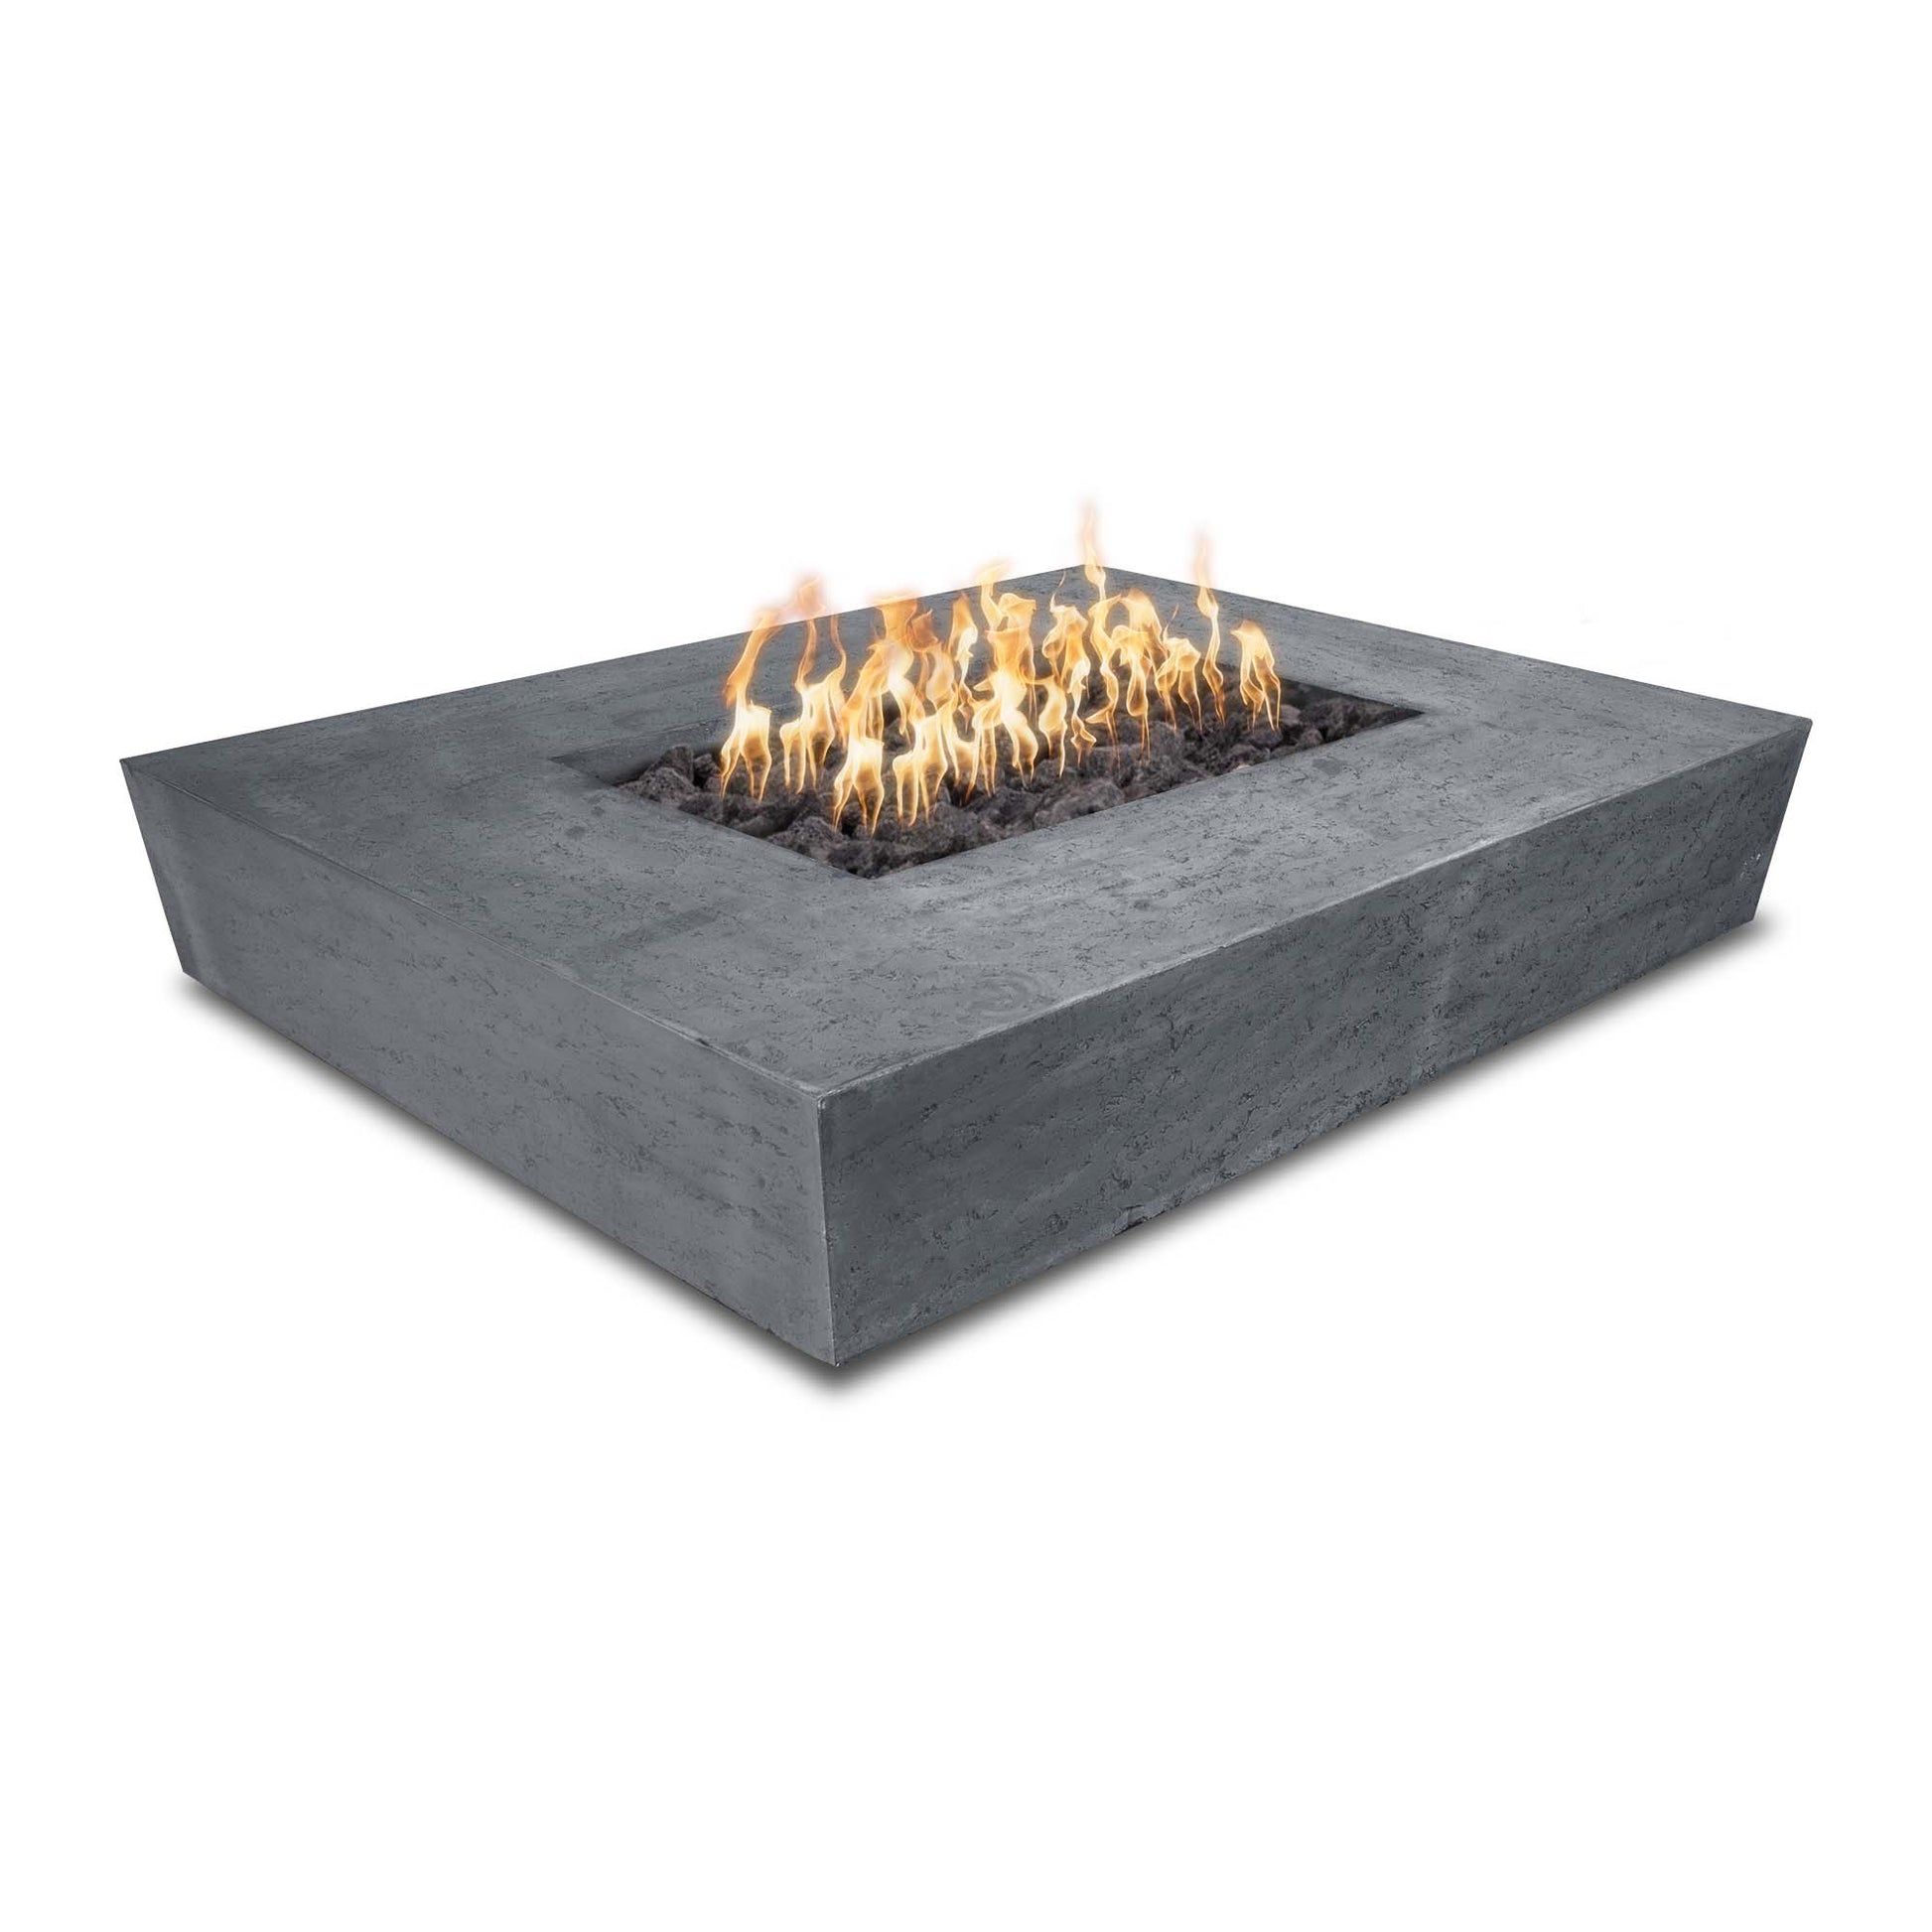 The Outdoor Plus Rectangular Heiko 58" Rustic White GFRC Concrete Natural Gas Fire Pit with Flame Sense with Spark Ignition